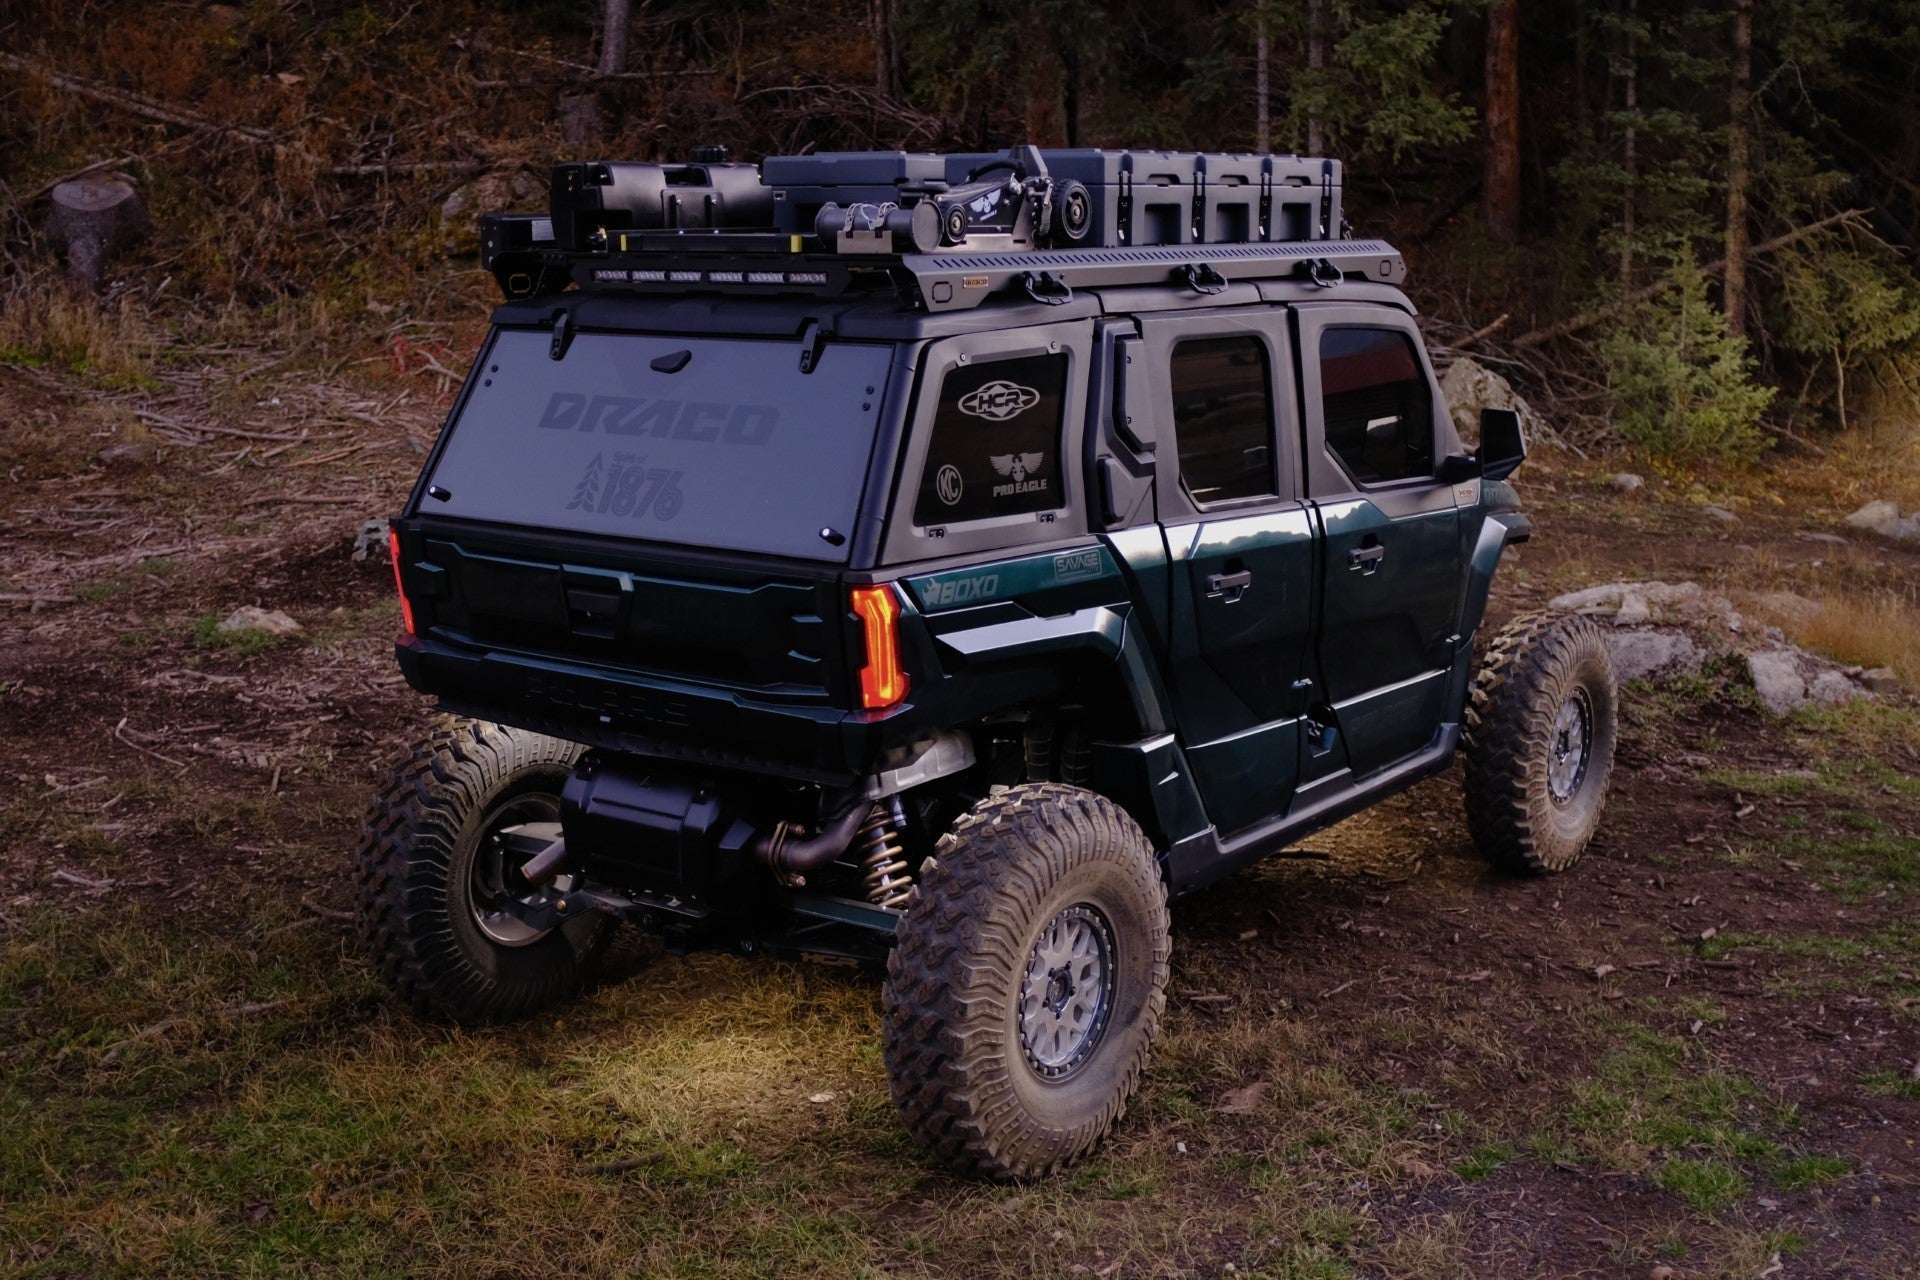 upTOP Overland SxS Roof Rack upTOP Overland | Polaris XPEDITION ADV 5 Full Roof Rack